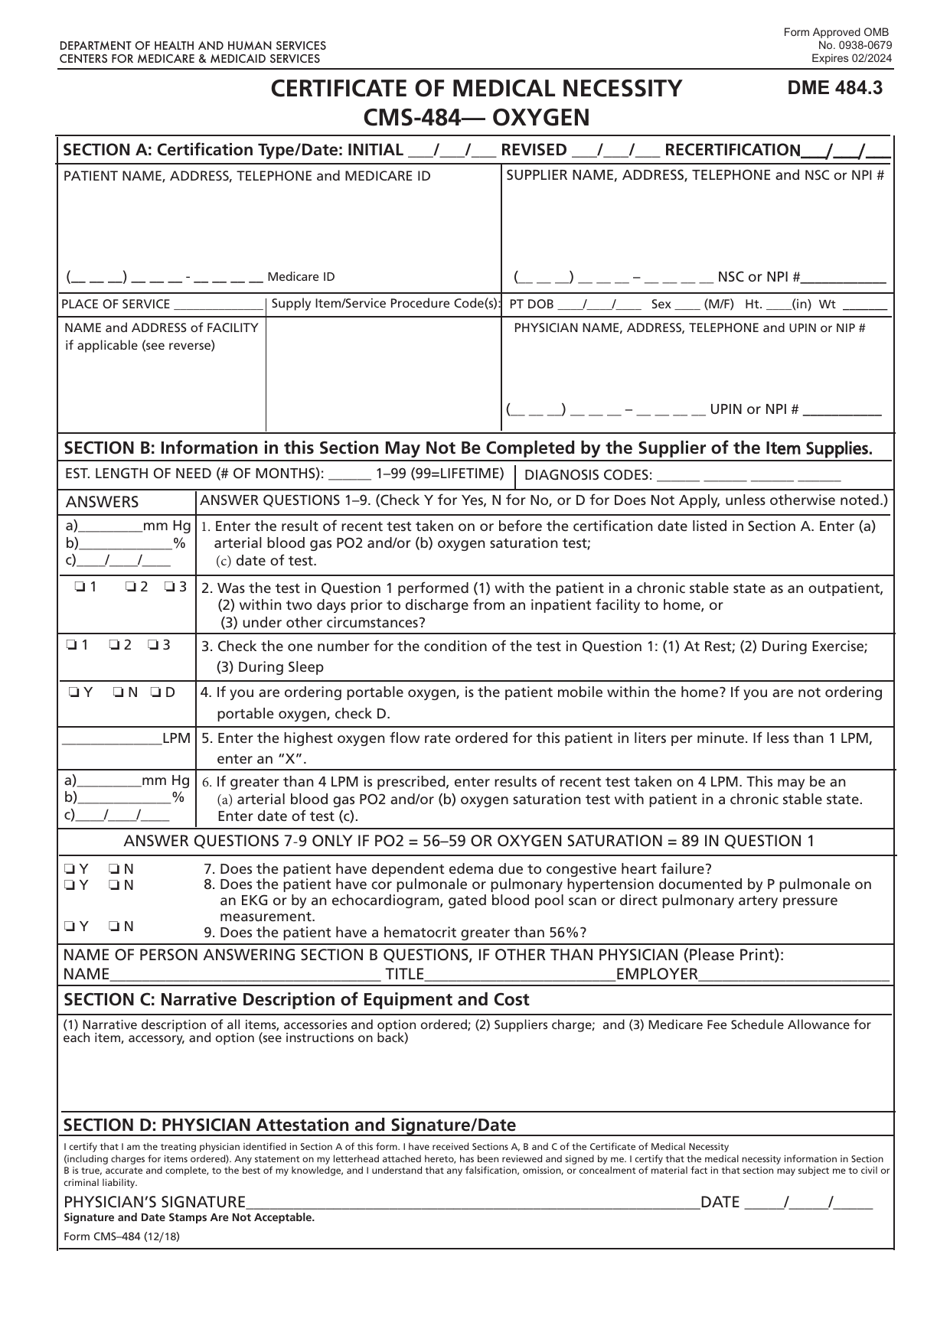 Form CMS-484 Certificate of Medical Necessity - Oxygen, Page 1